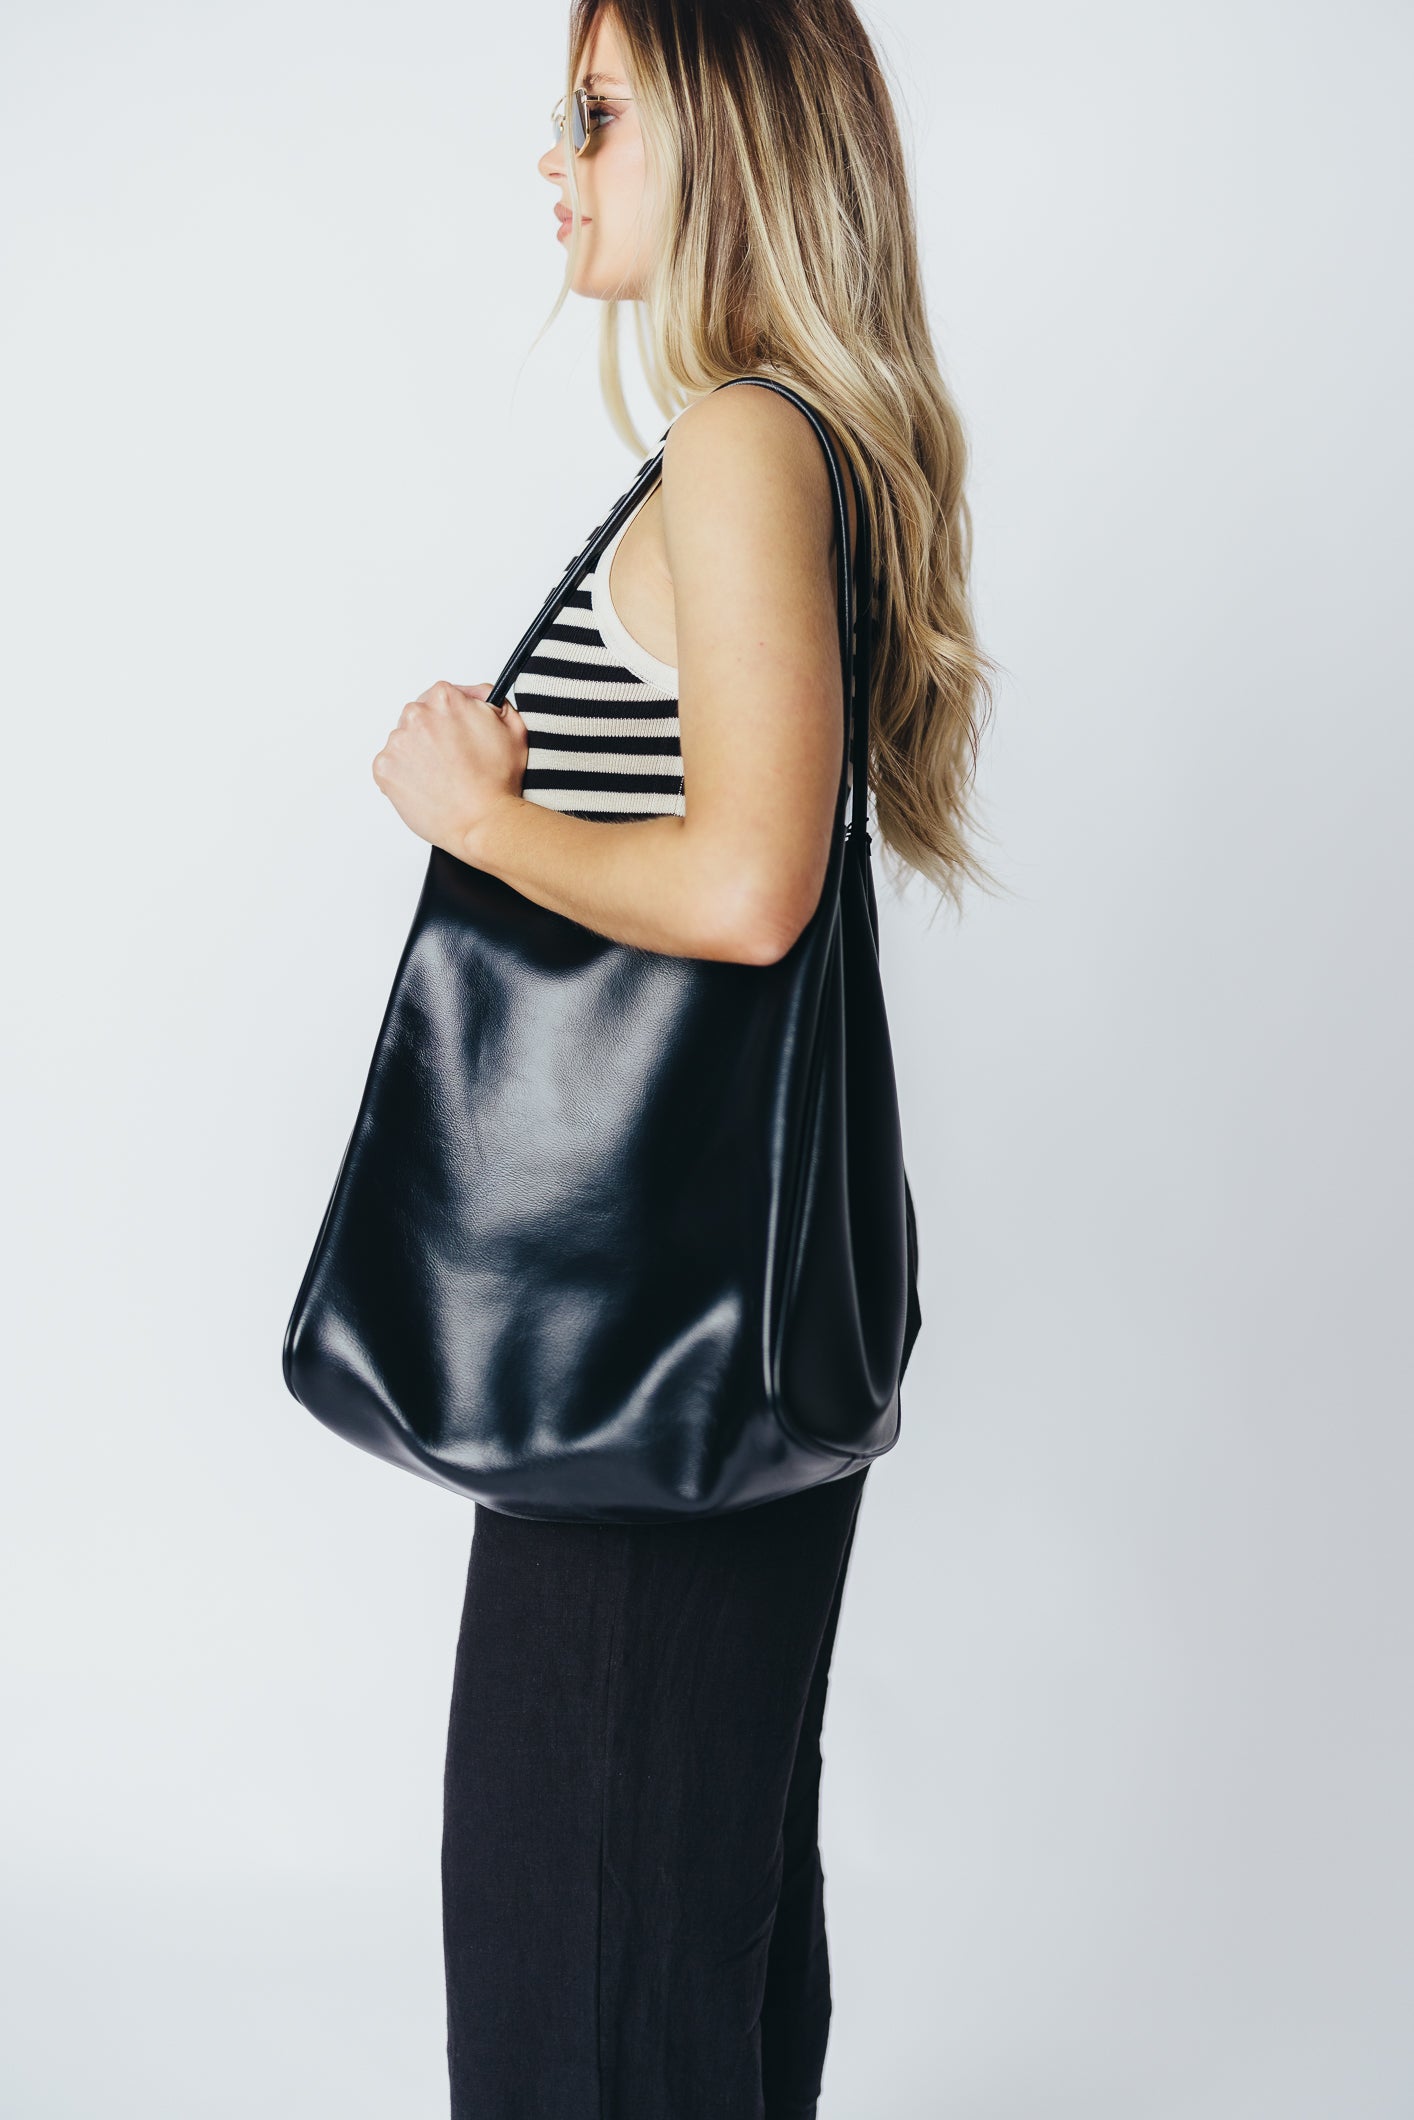 Hollace North South Tote in Black